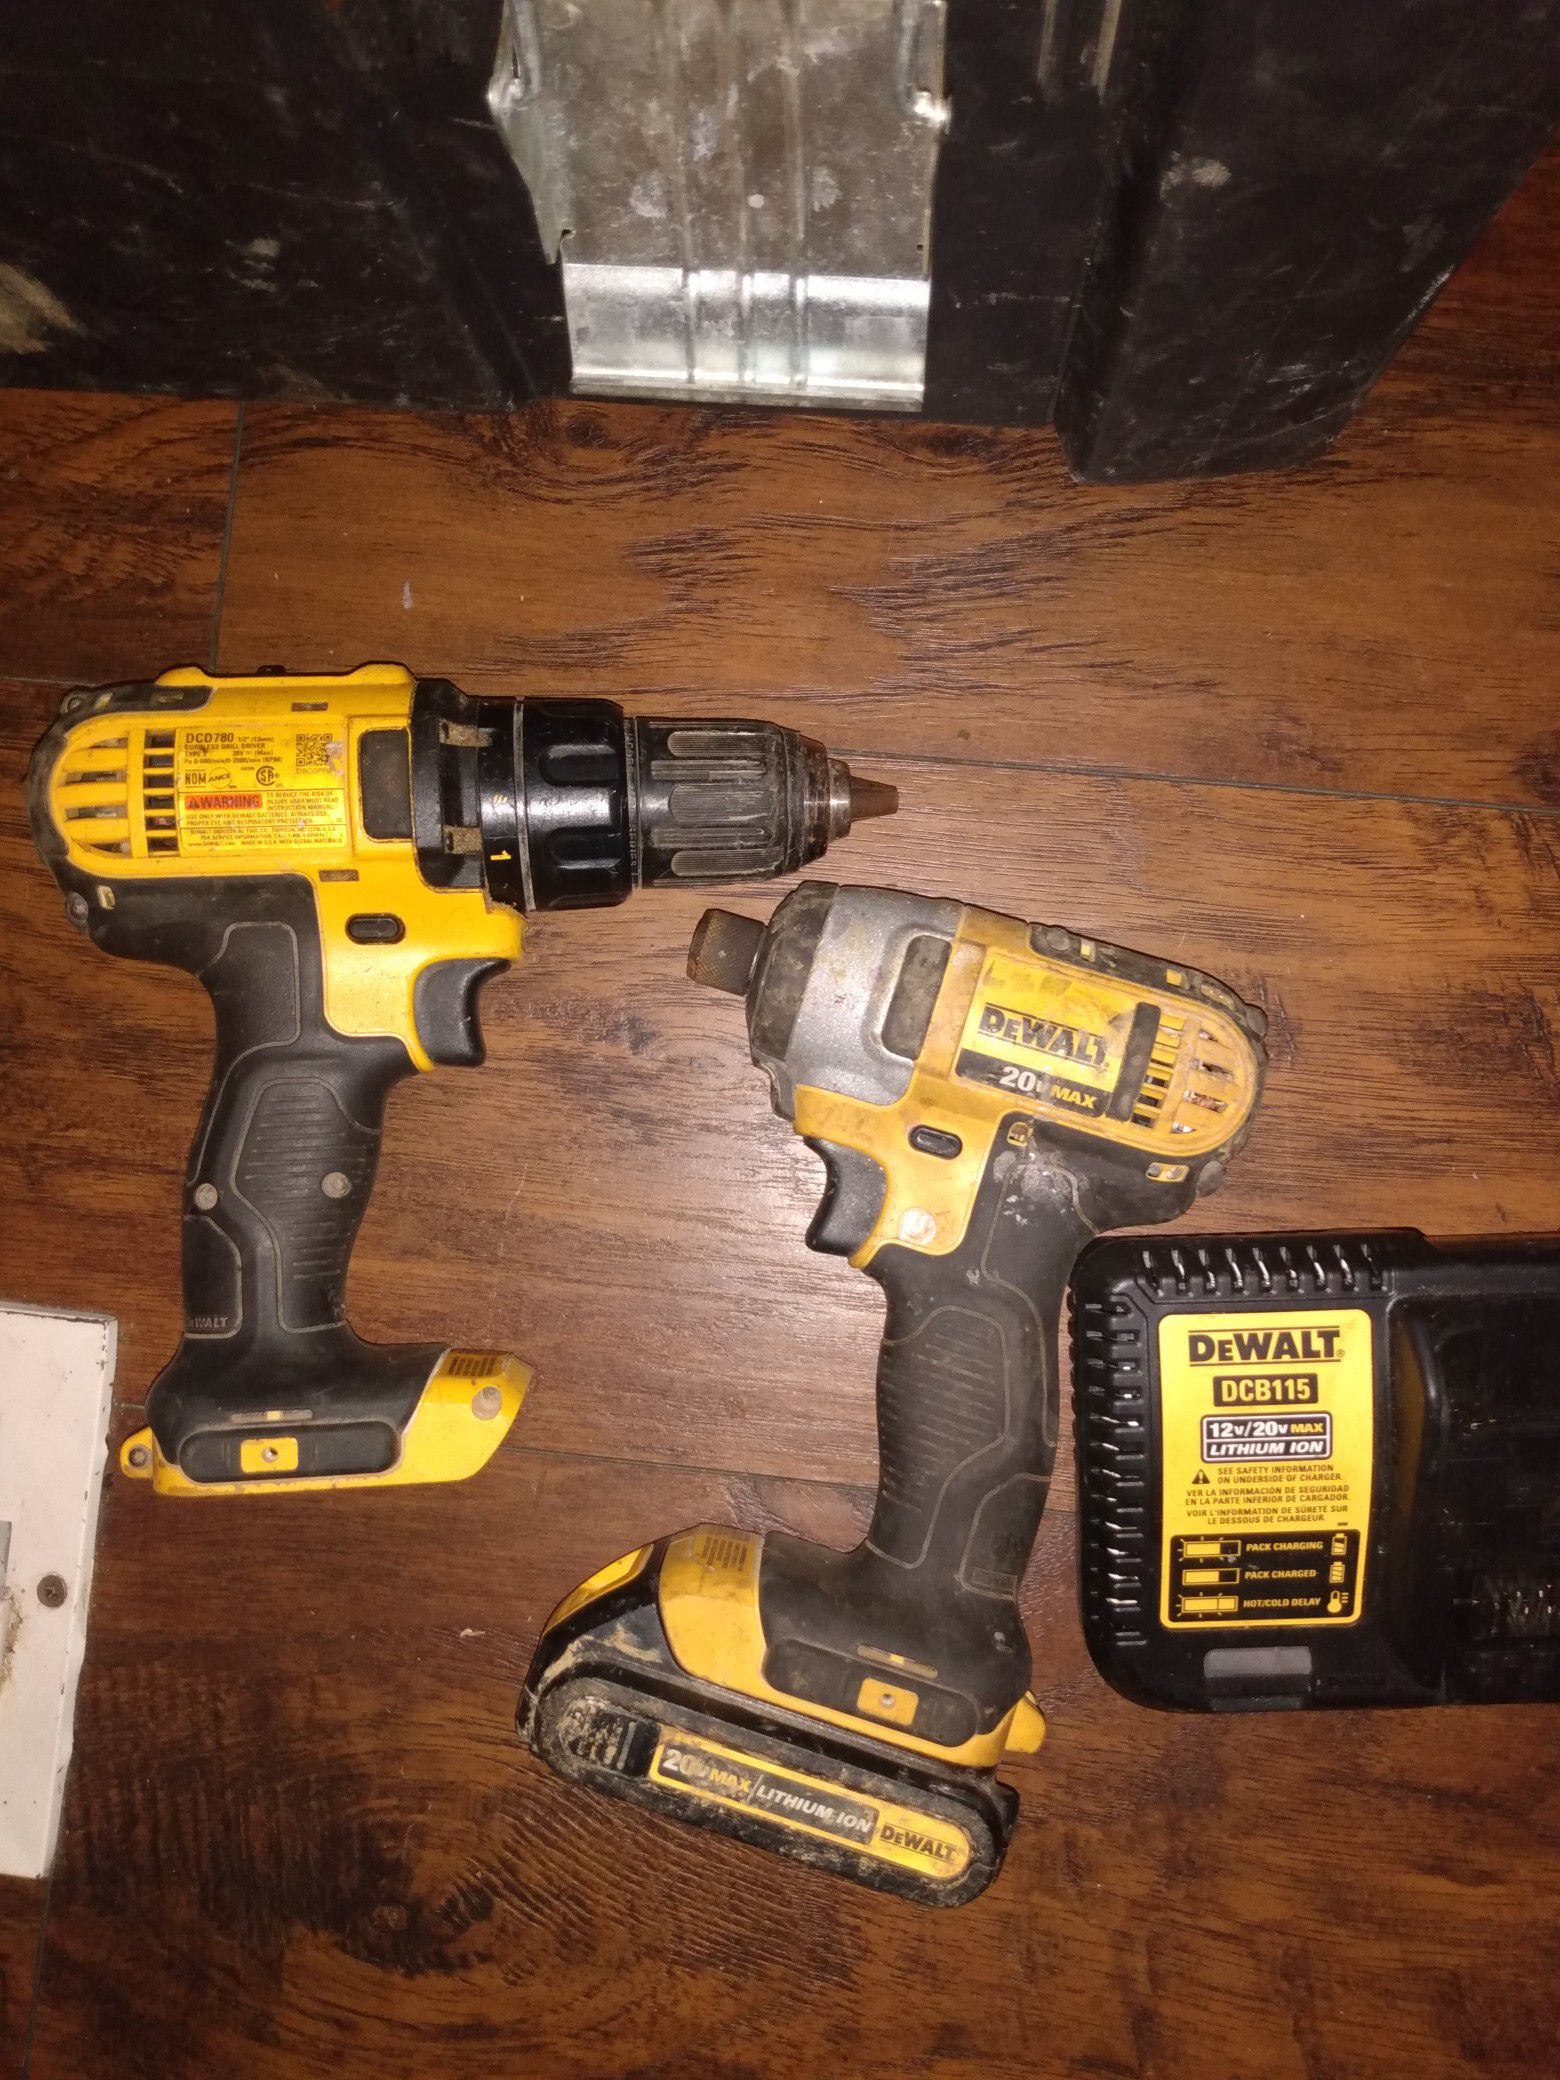 DeWalt cordless drill and impact driver